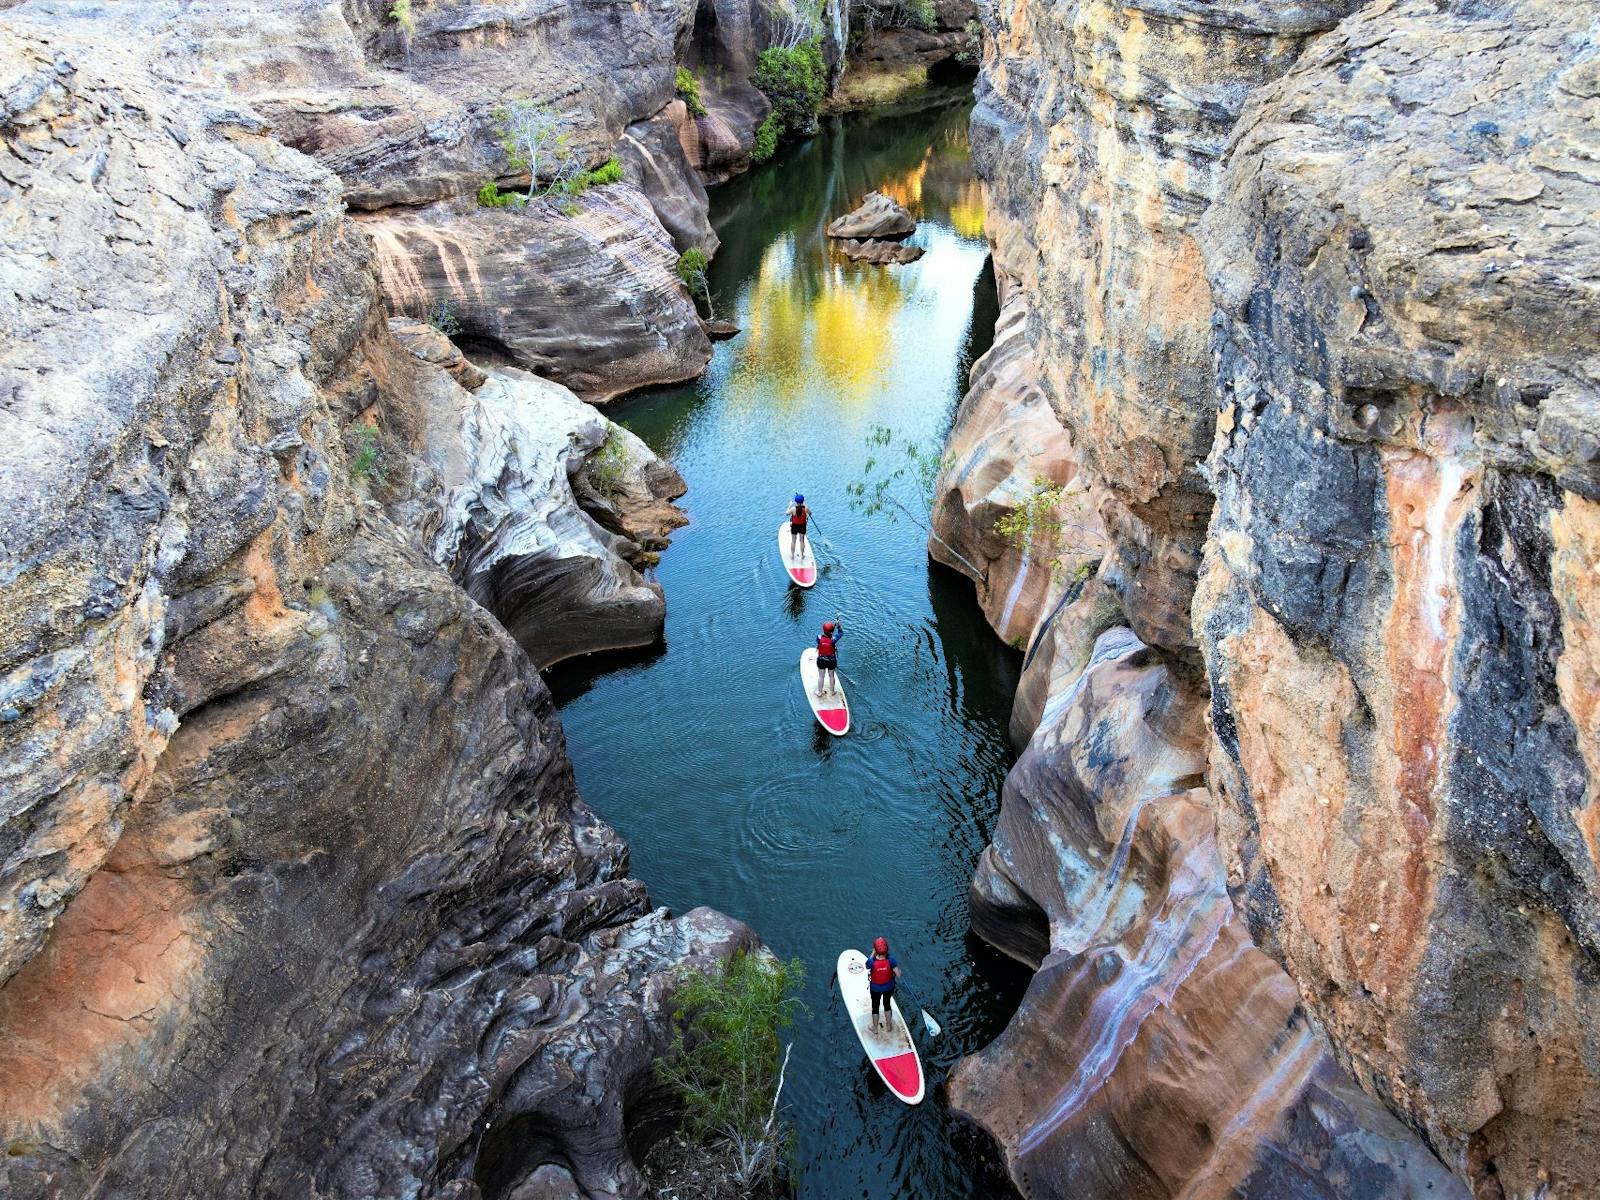 SUP at Cobbold Gorge